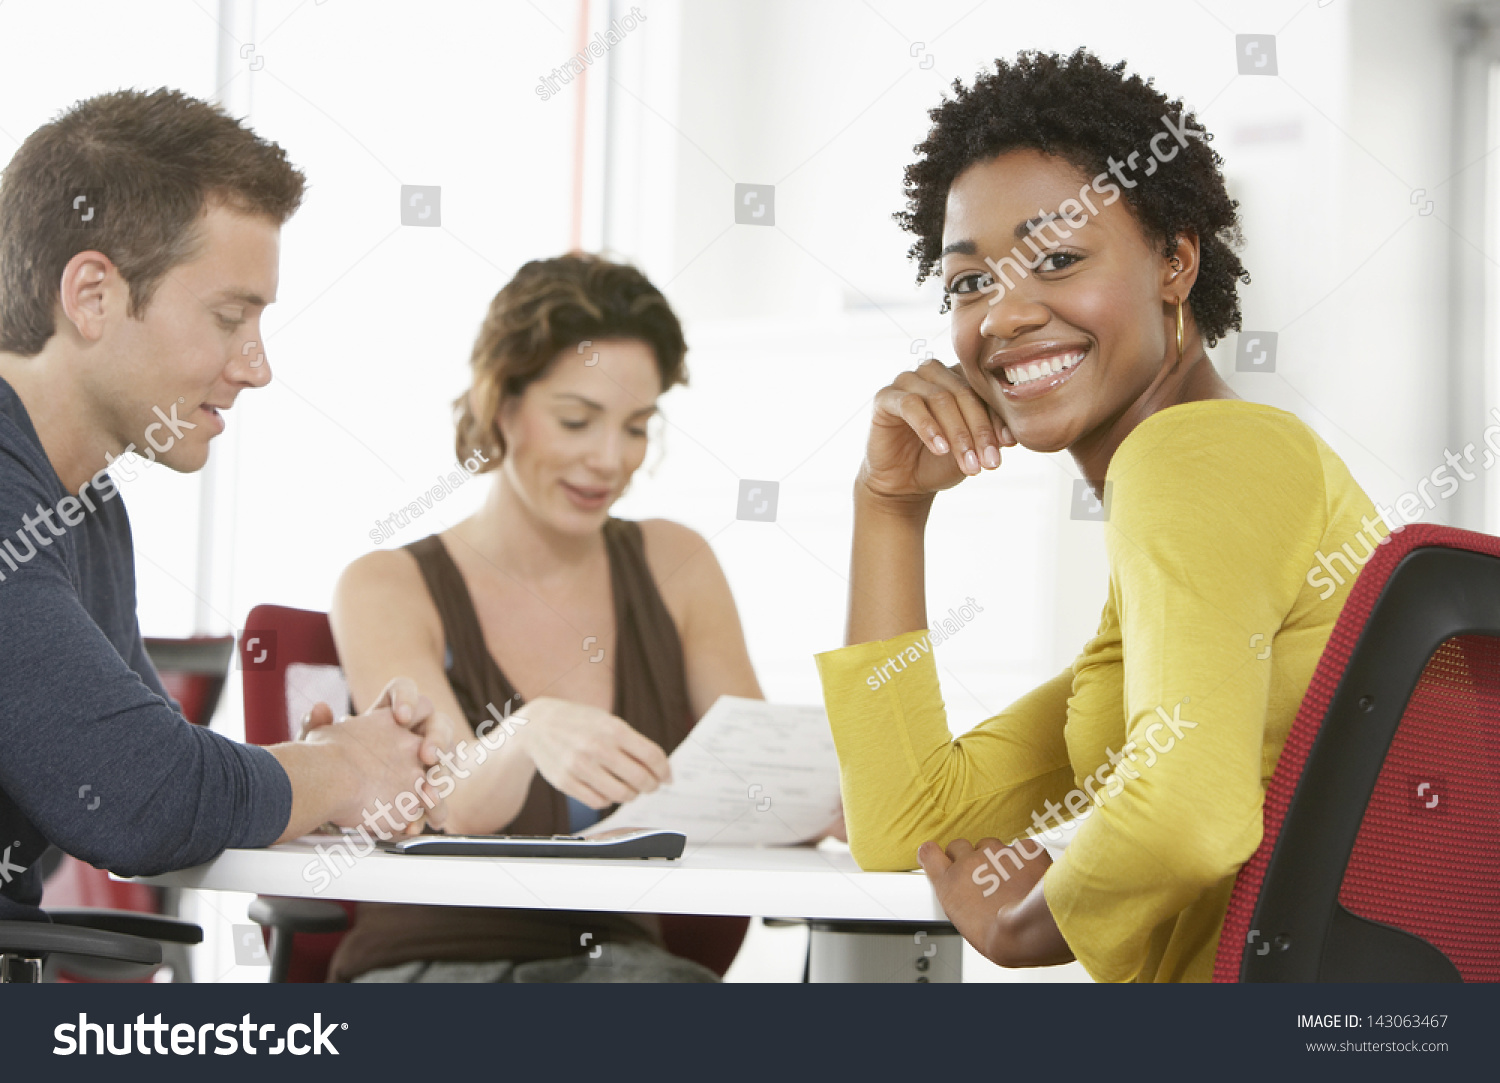 Portrait of young businesswoman with colleagues in meeting room #143063467